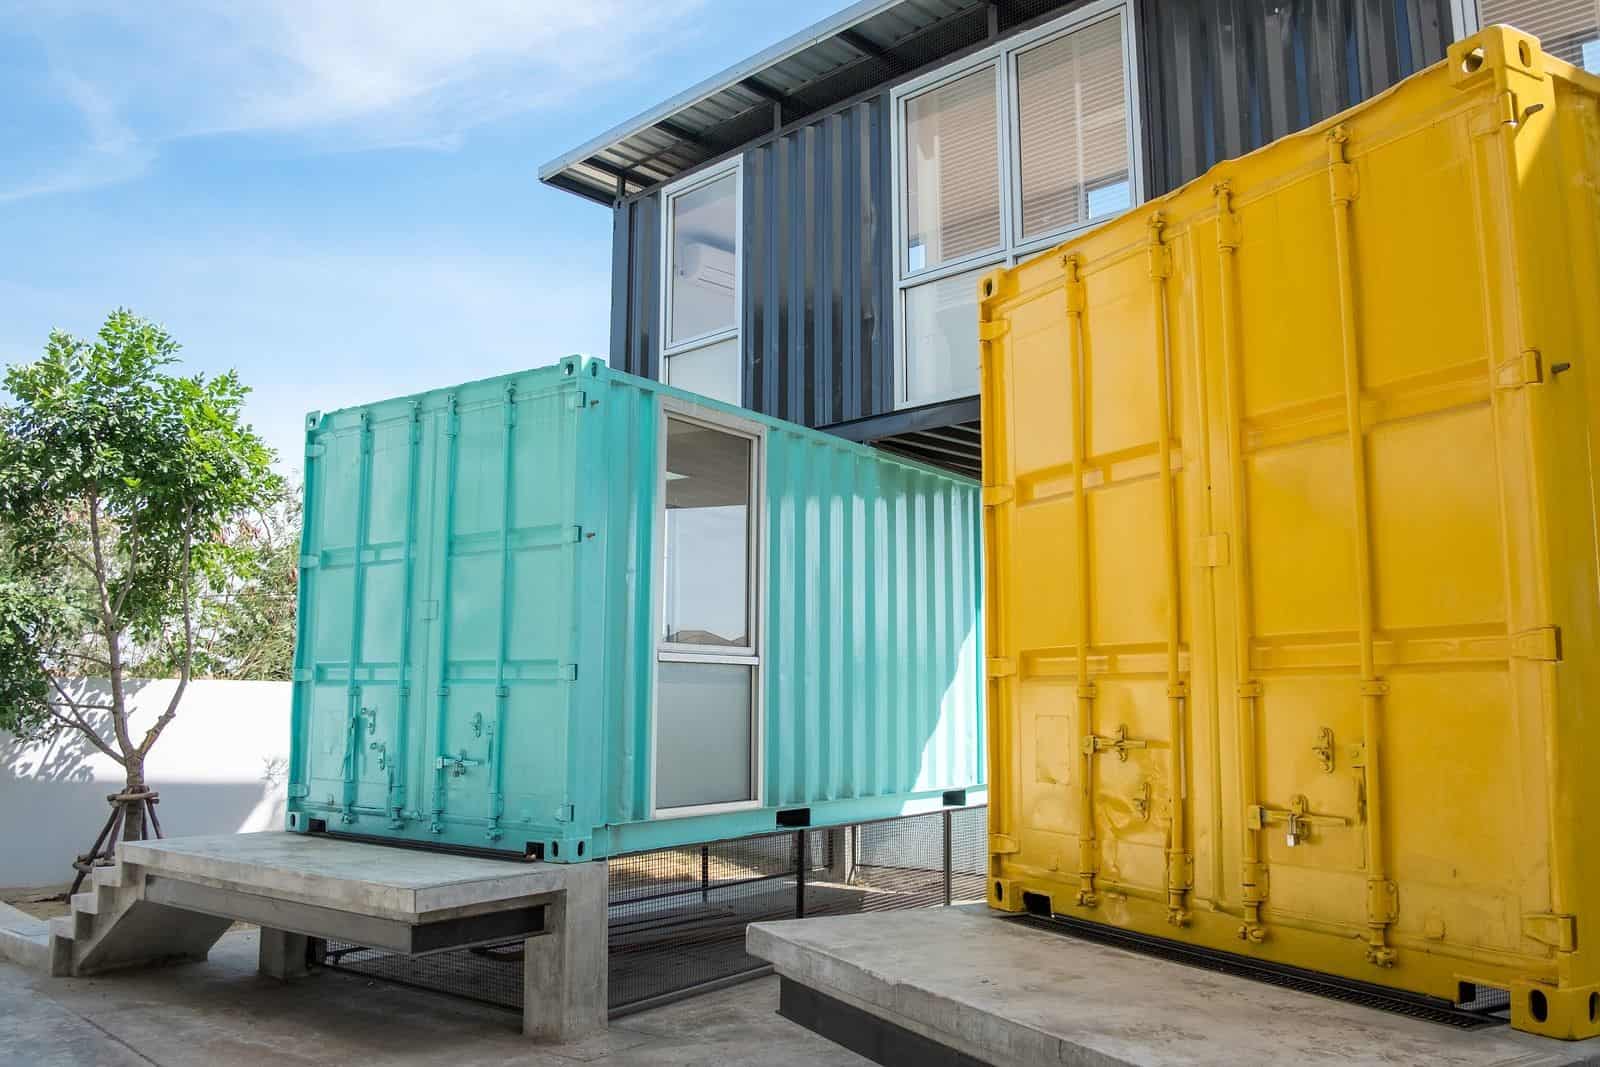 Families Can Turn Shipping Containers Into Low-Cost Two-Story Homes